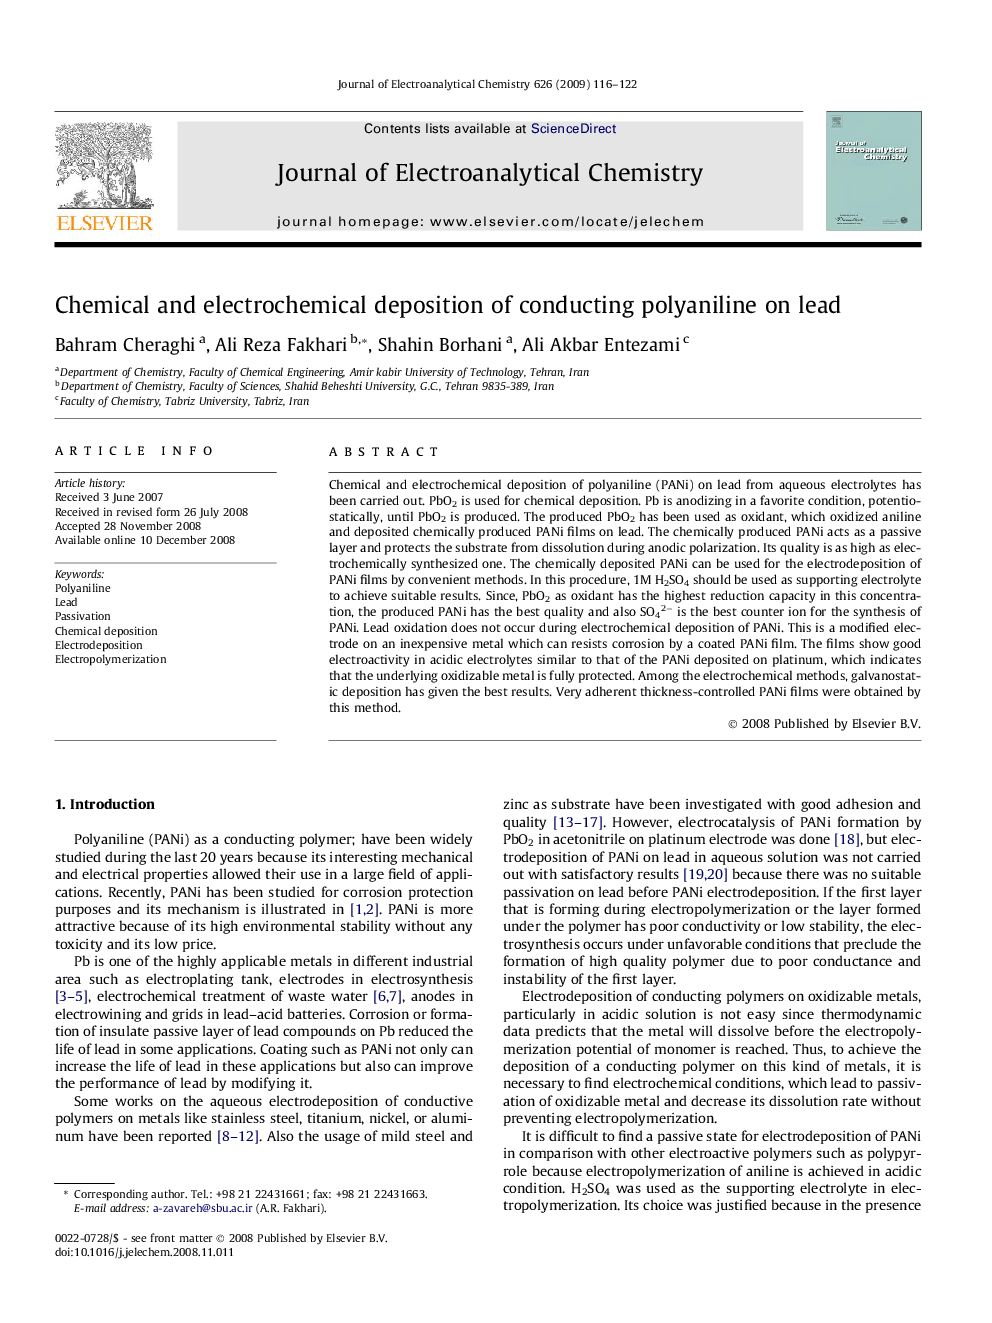 Chemical and electrochemical deposition of conducting polyaniline on lead